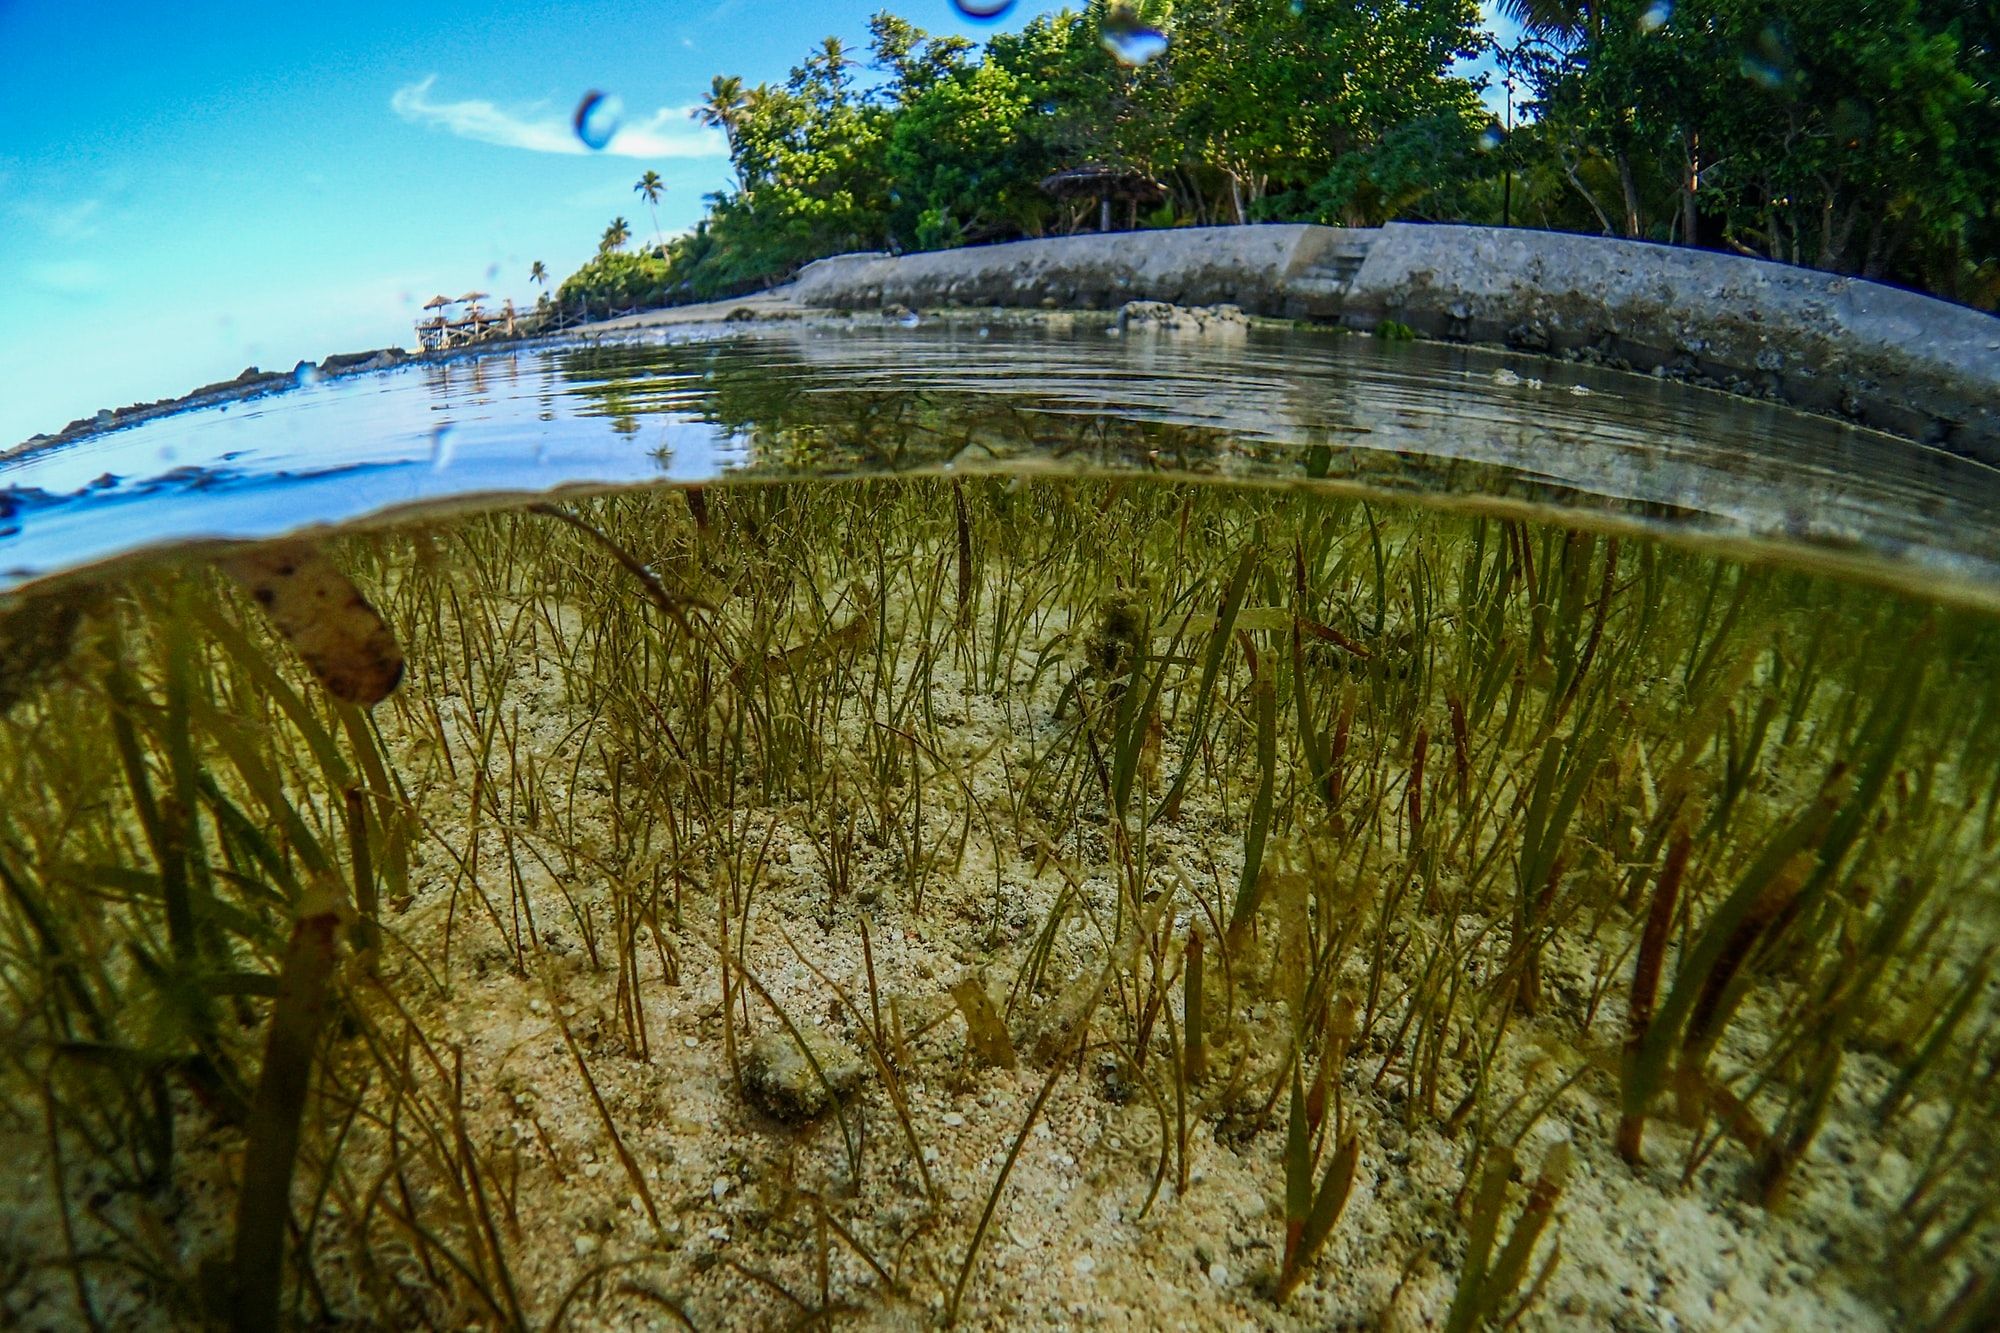 🌊 Replanted seagrass restores the ocean